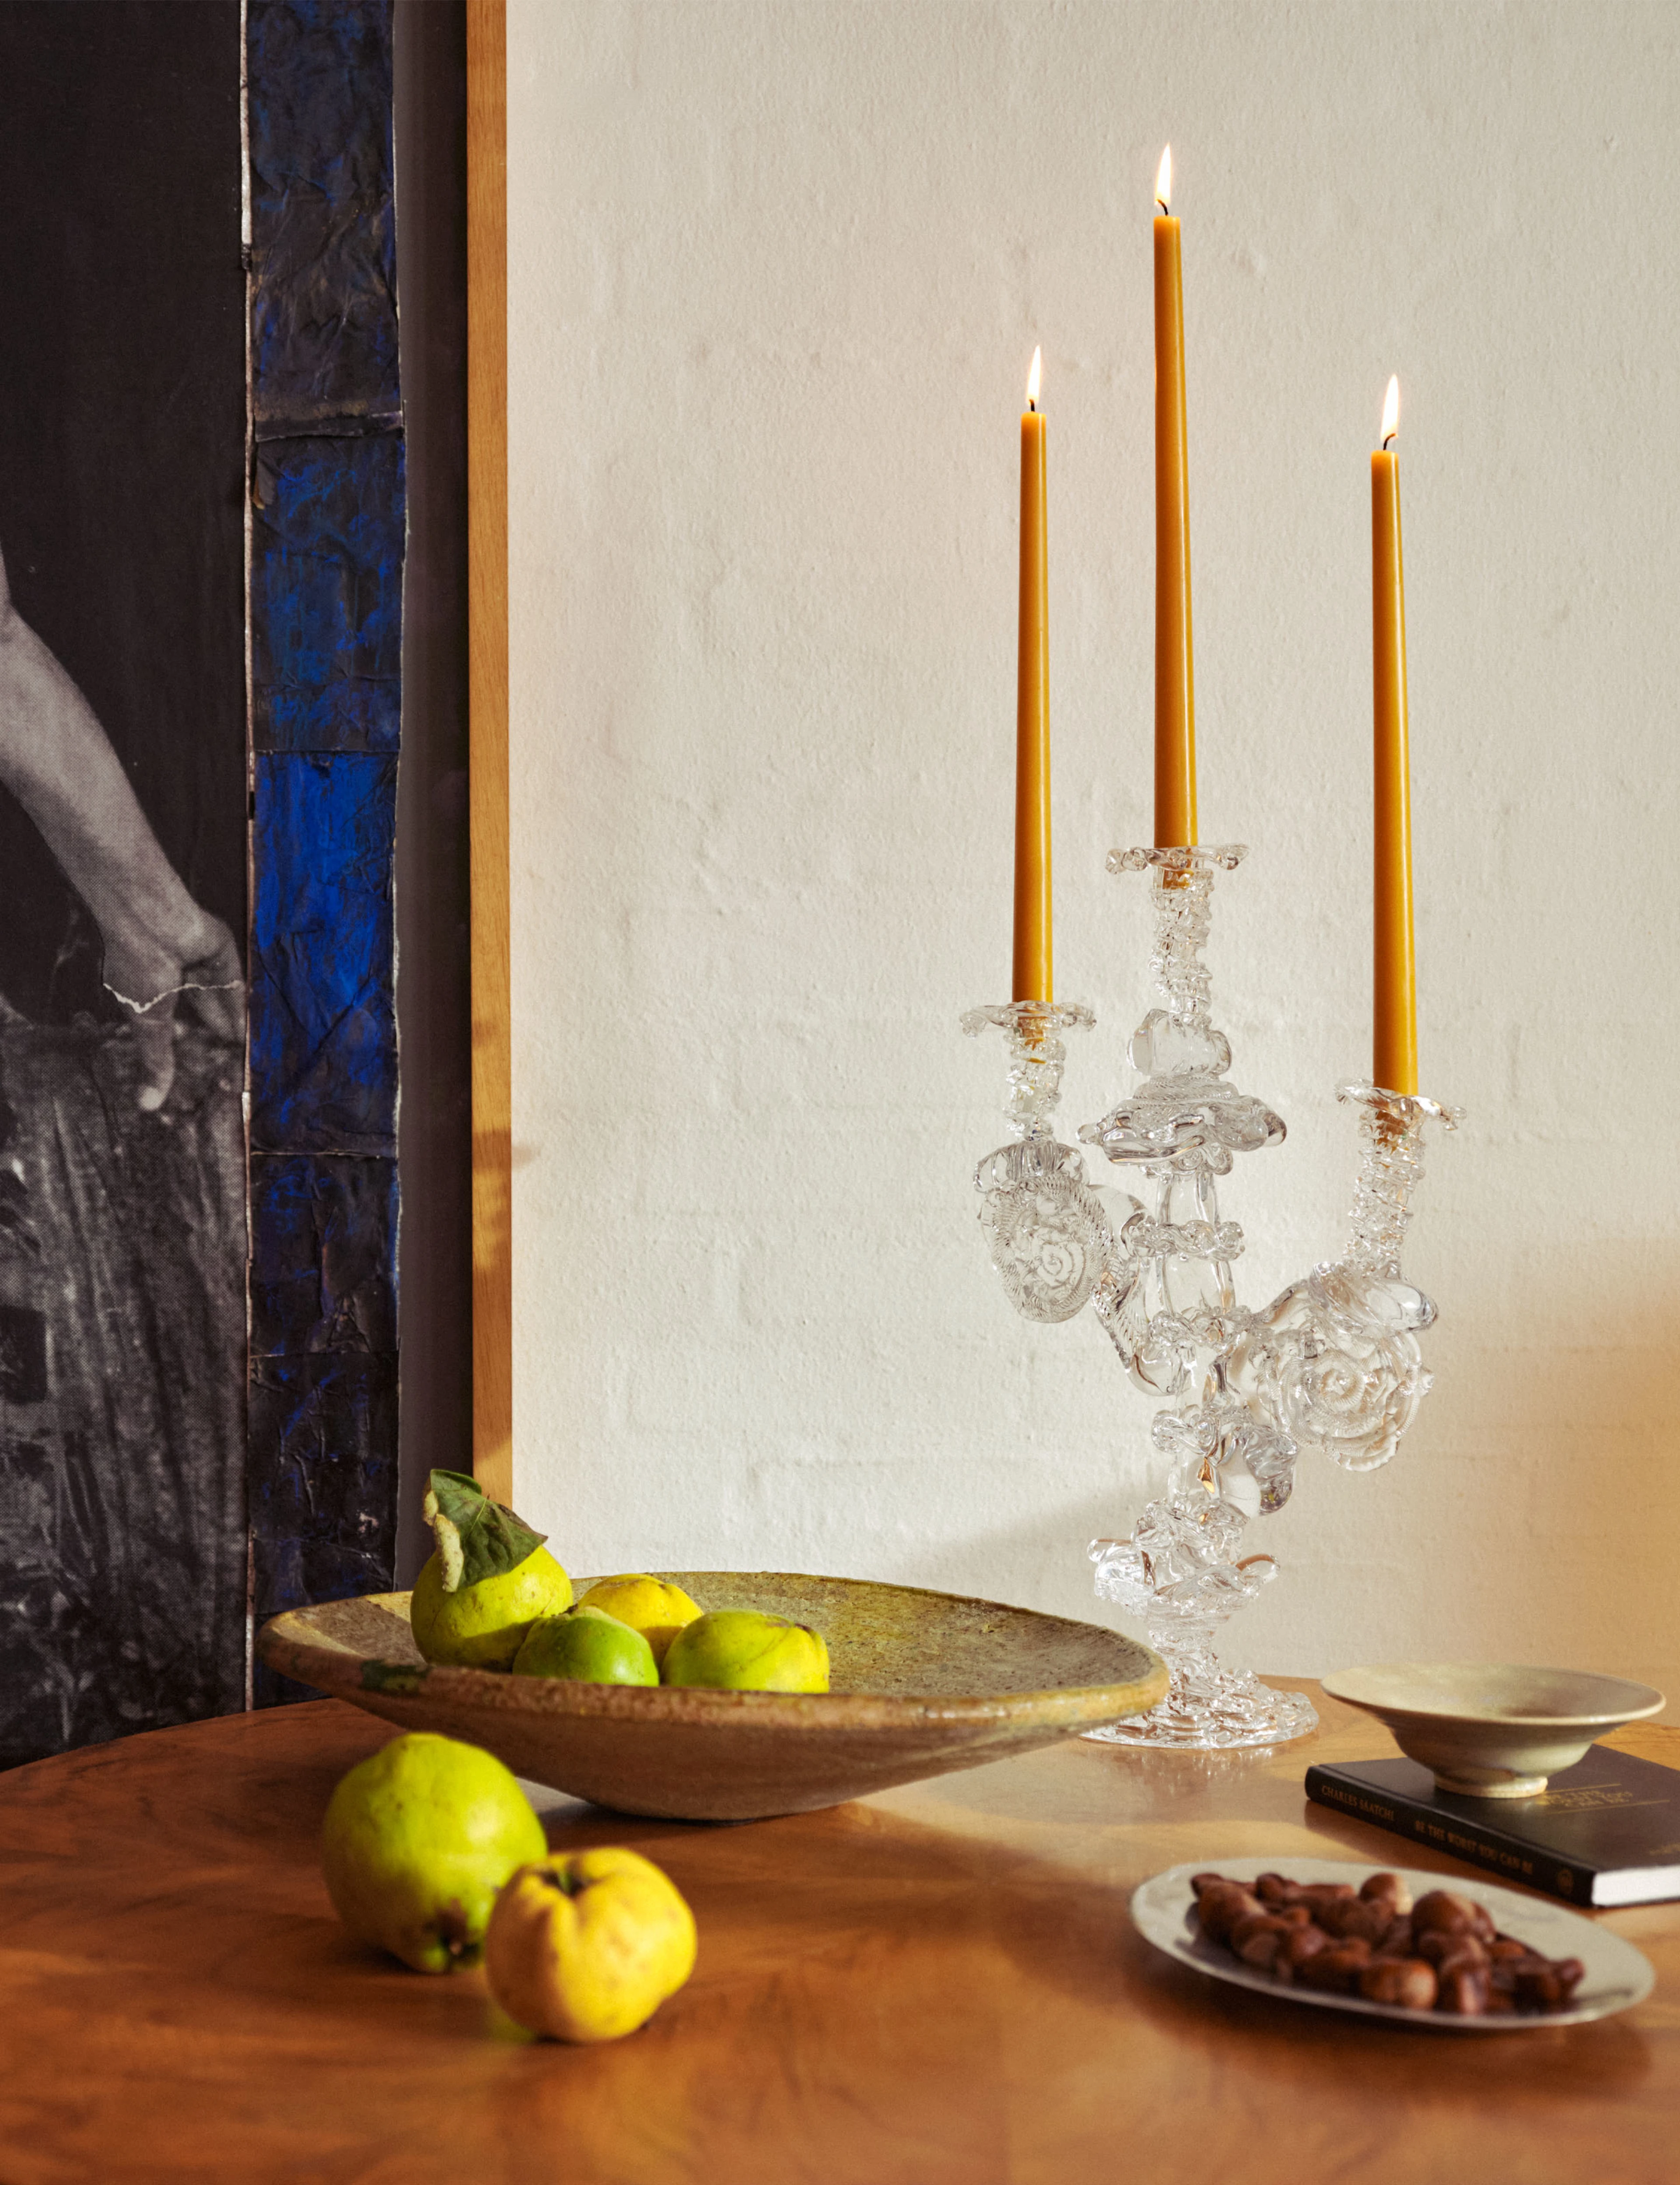 Image of fruit and candles on a table